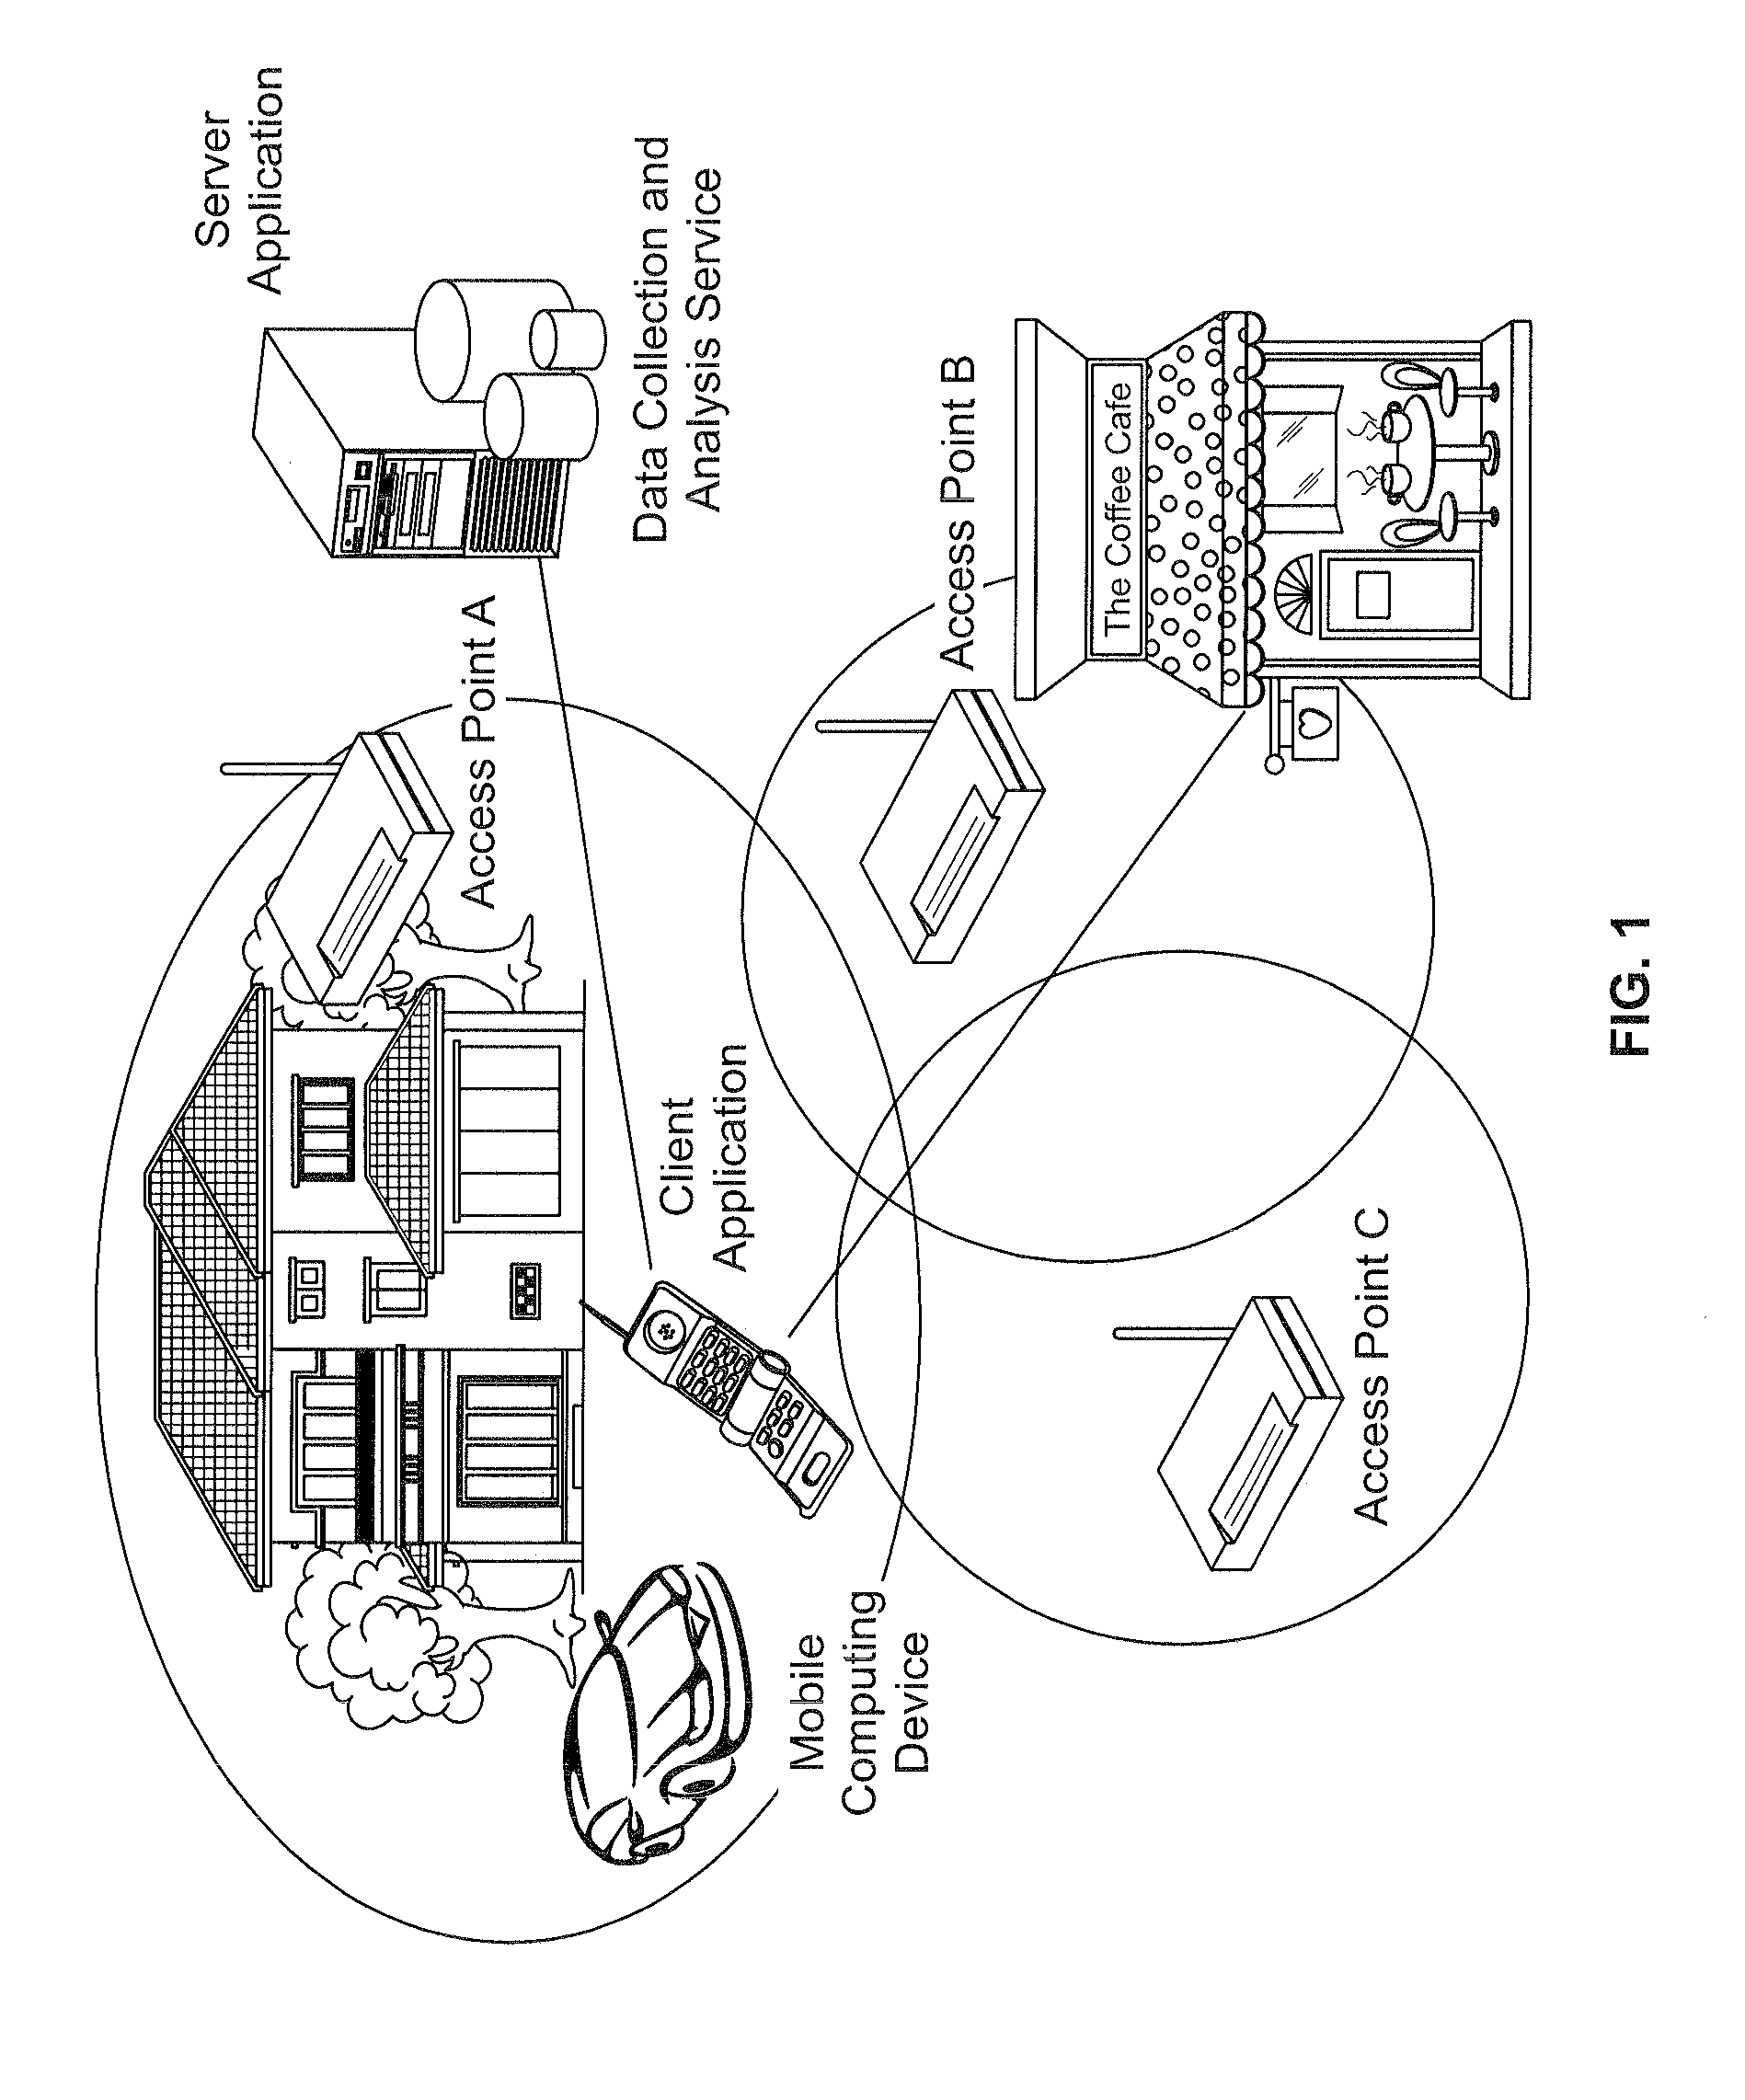 Cyber foraging network system for automatic wireless network access point detection and connection